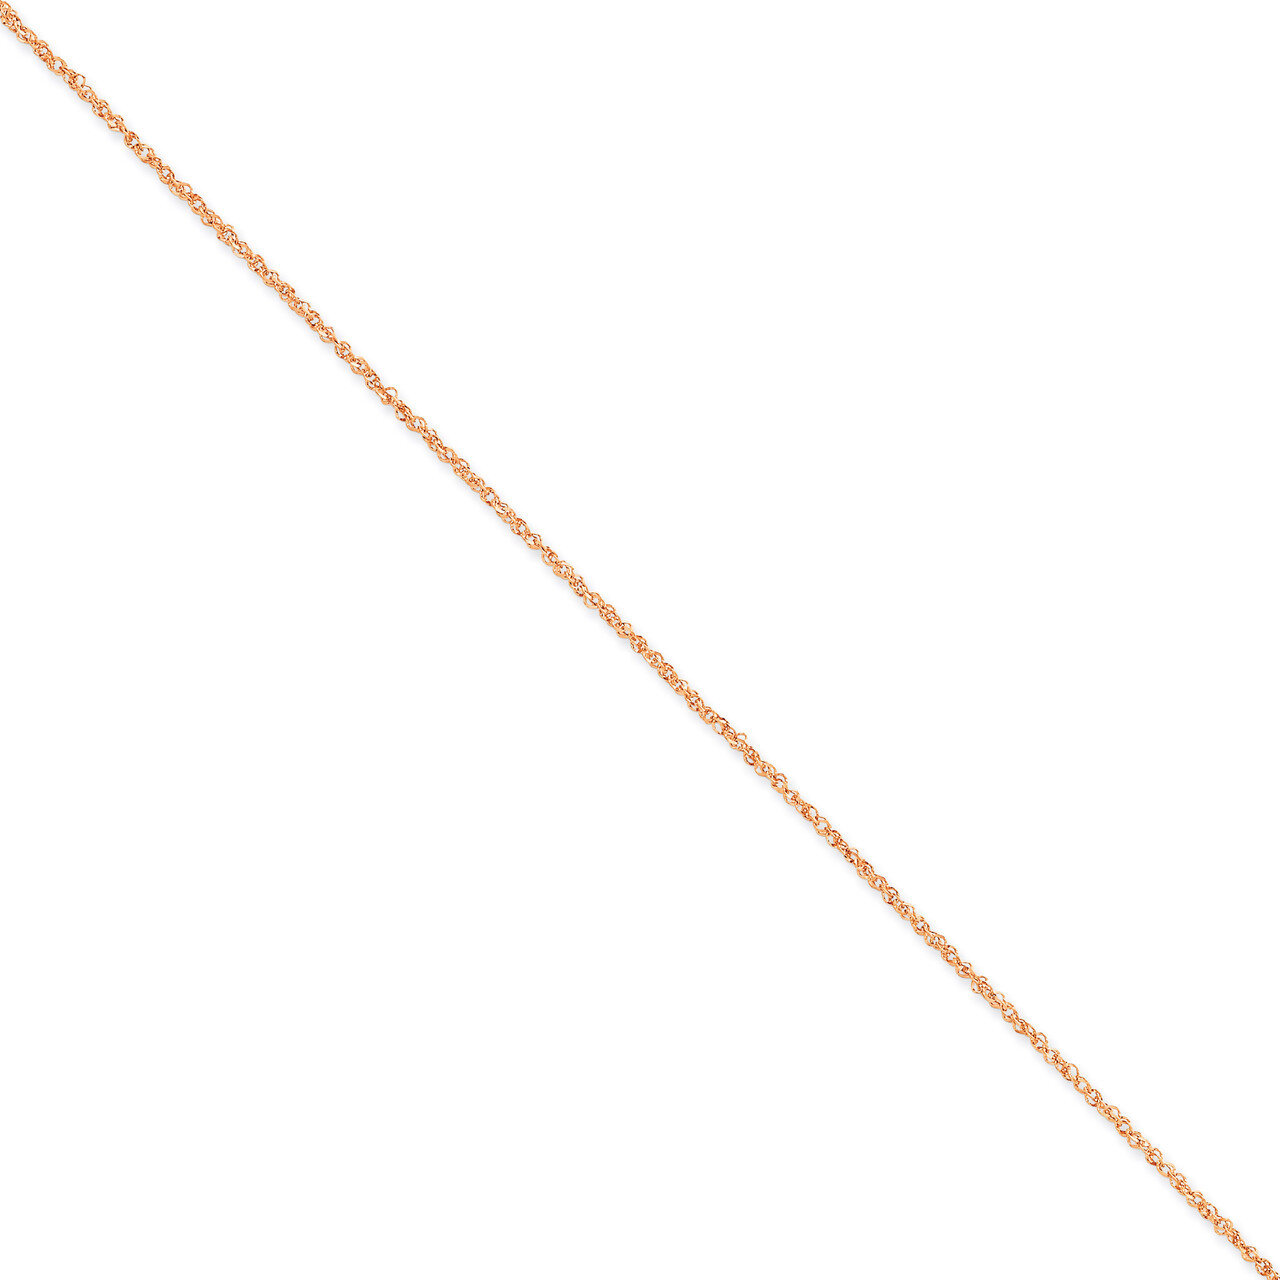 1.7mm Ropa Chain 24 Inch 14k Rose Gold RSC28-24